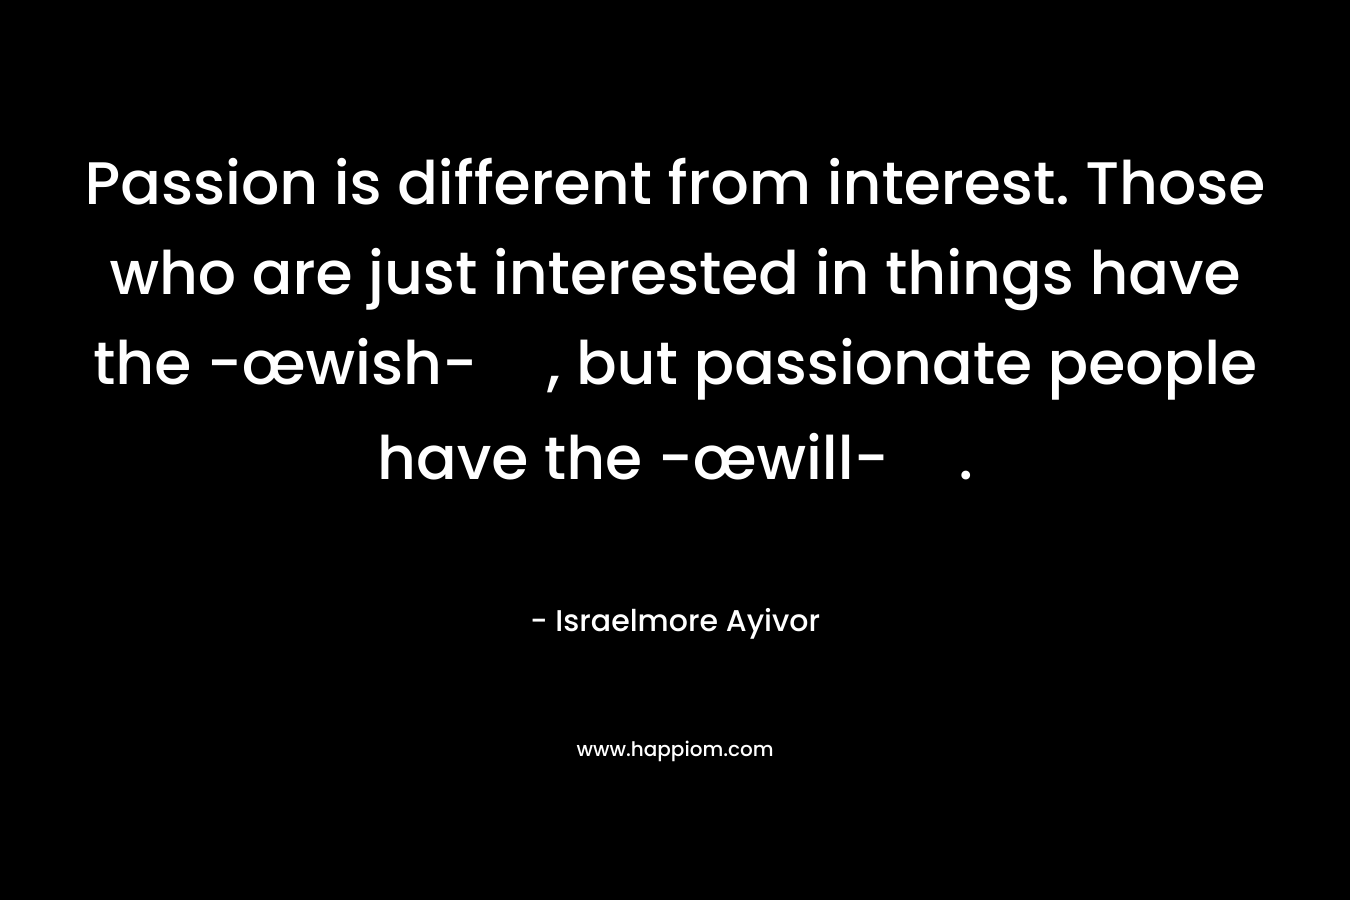 Passion is different from interest. Those who are just interested in things have the -œwish-, but passionate people have the -œwill-.